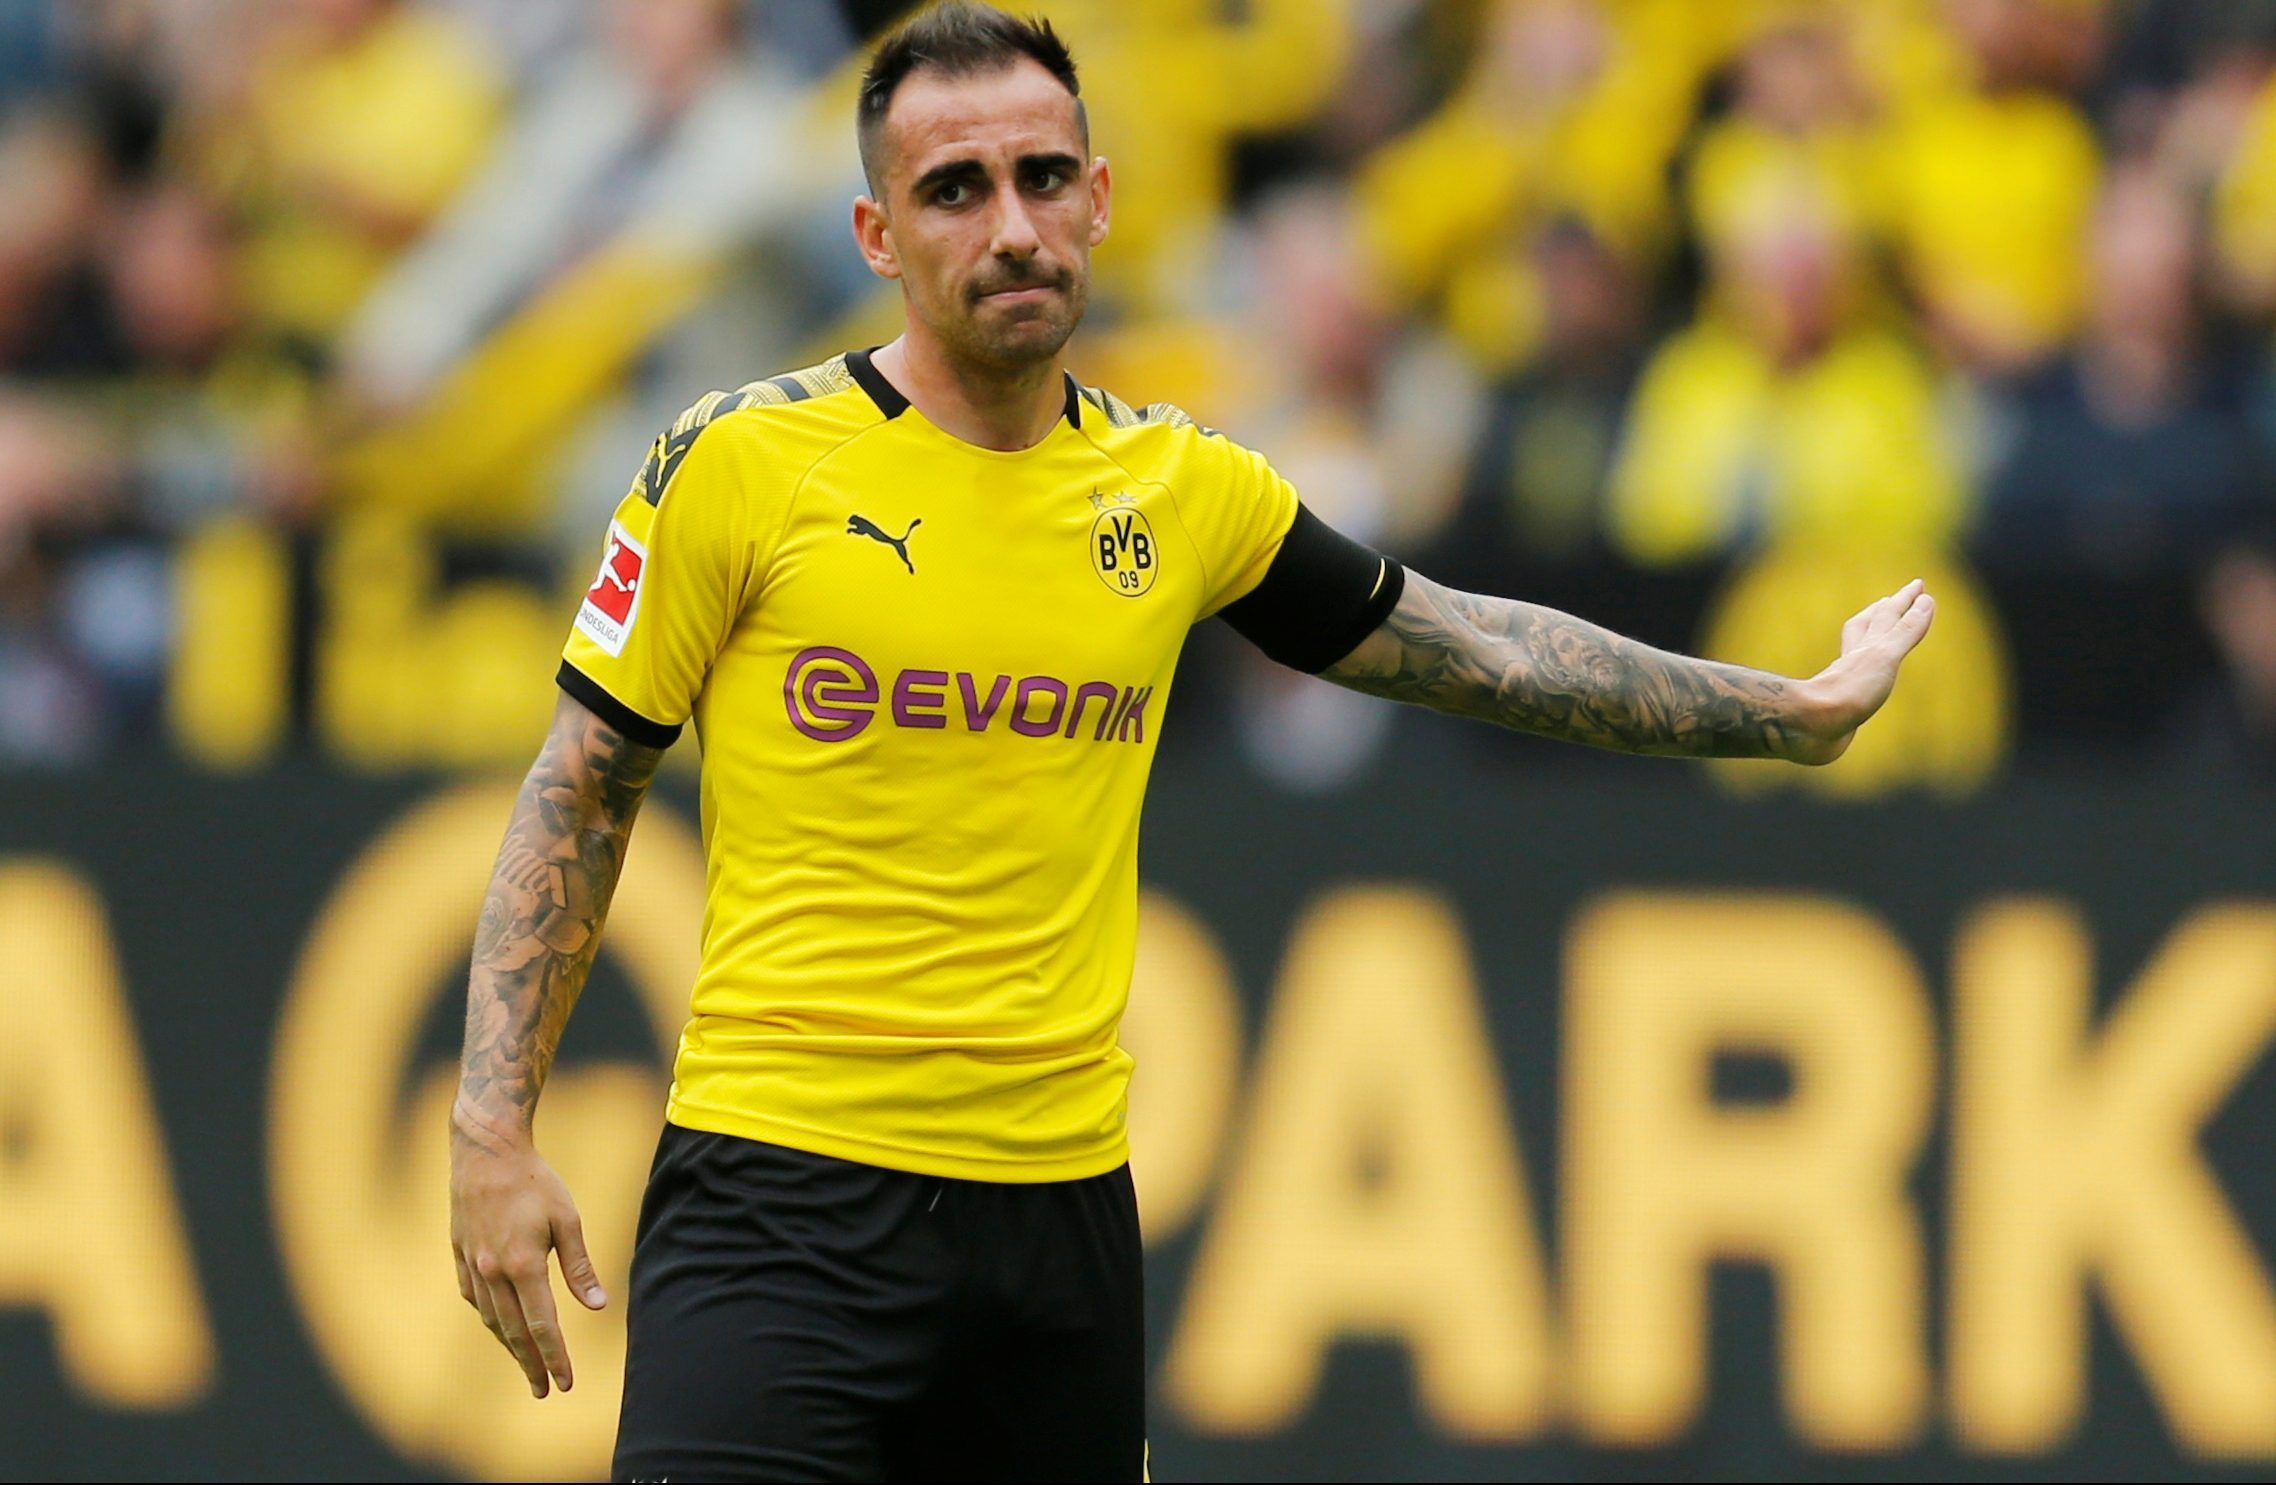 Soccer Football - Bundesliga - Borussia Dortmund v FC Augsburg - Signal Iduna Park, Dortmund, Germany - August 17, 2019  Borussia Dortmund's Paco Alcacer reacts after a missed chance  REUTERS/Leon Kuegeler  DFL regulations prohibit any use of photographs as image sequences and/or quasi-video